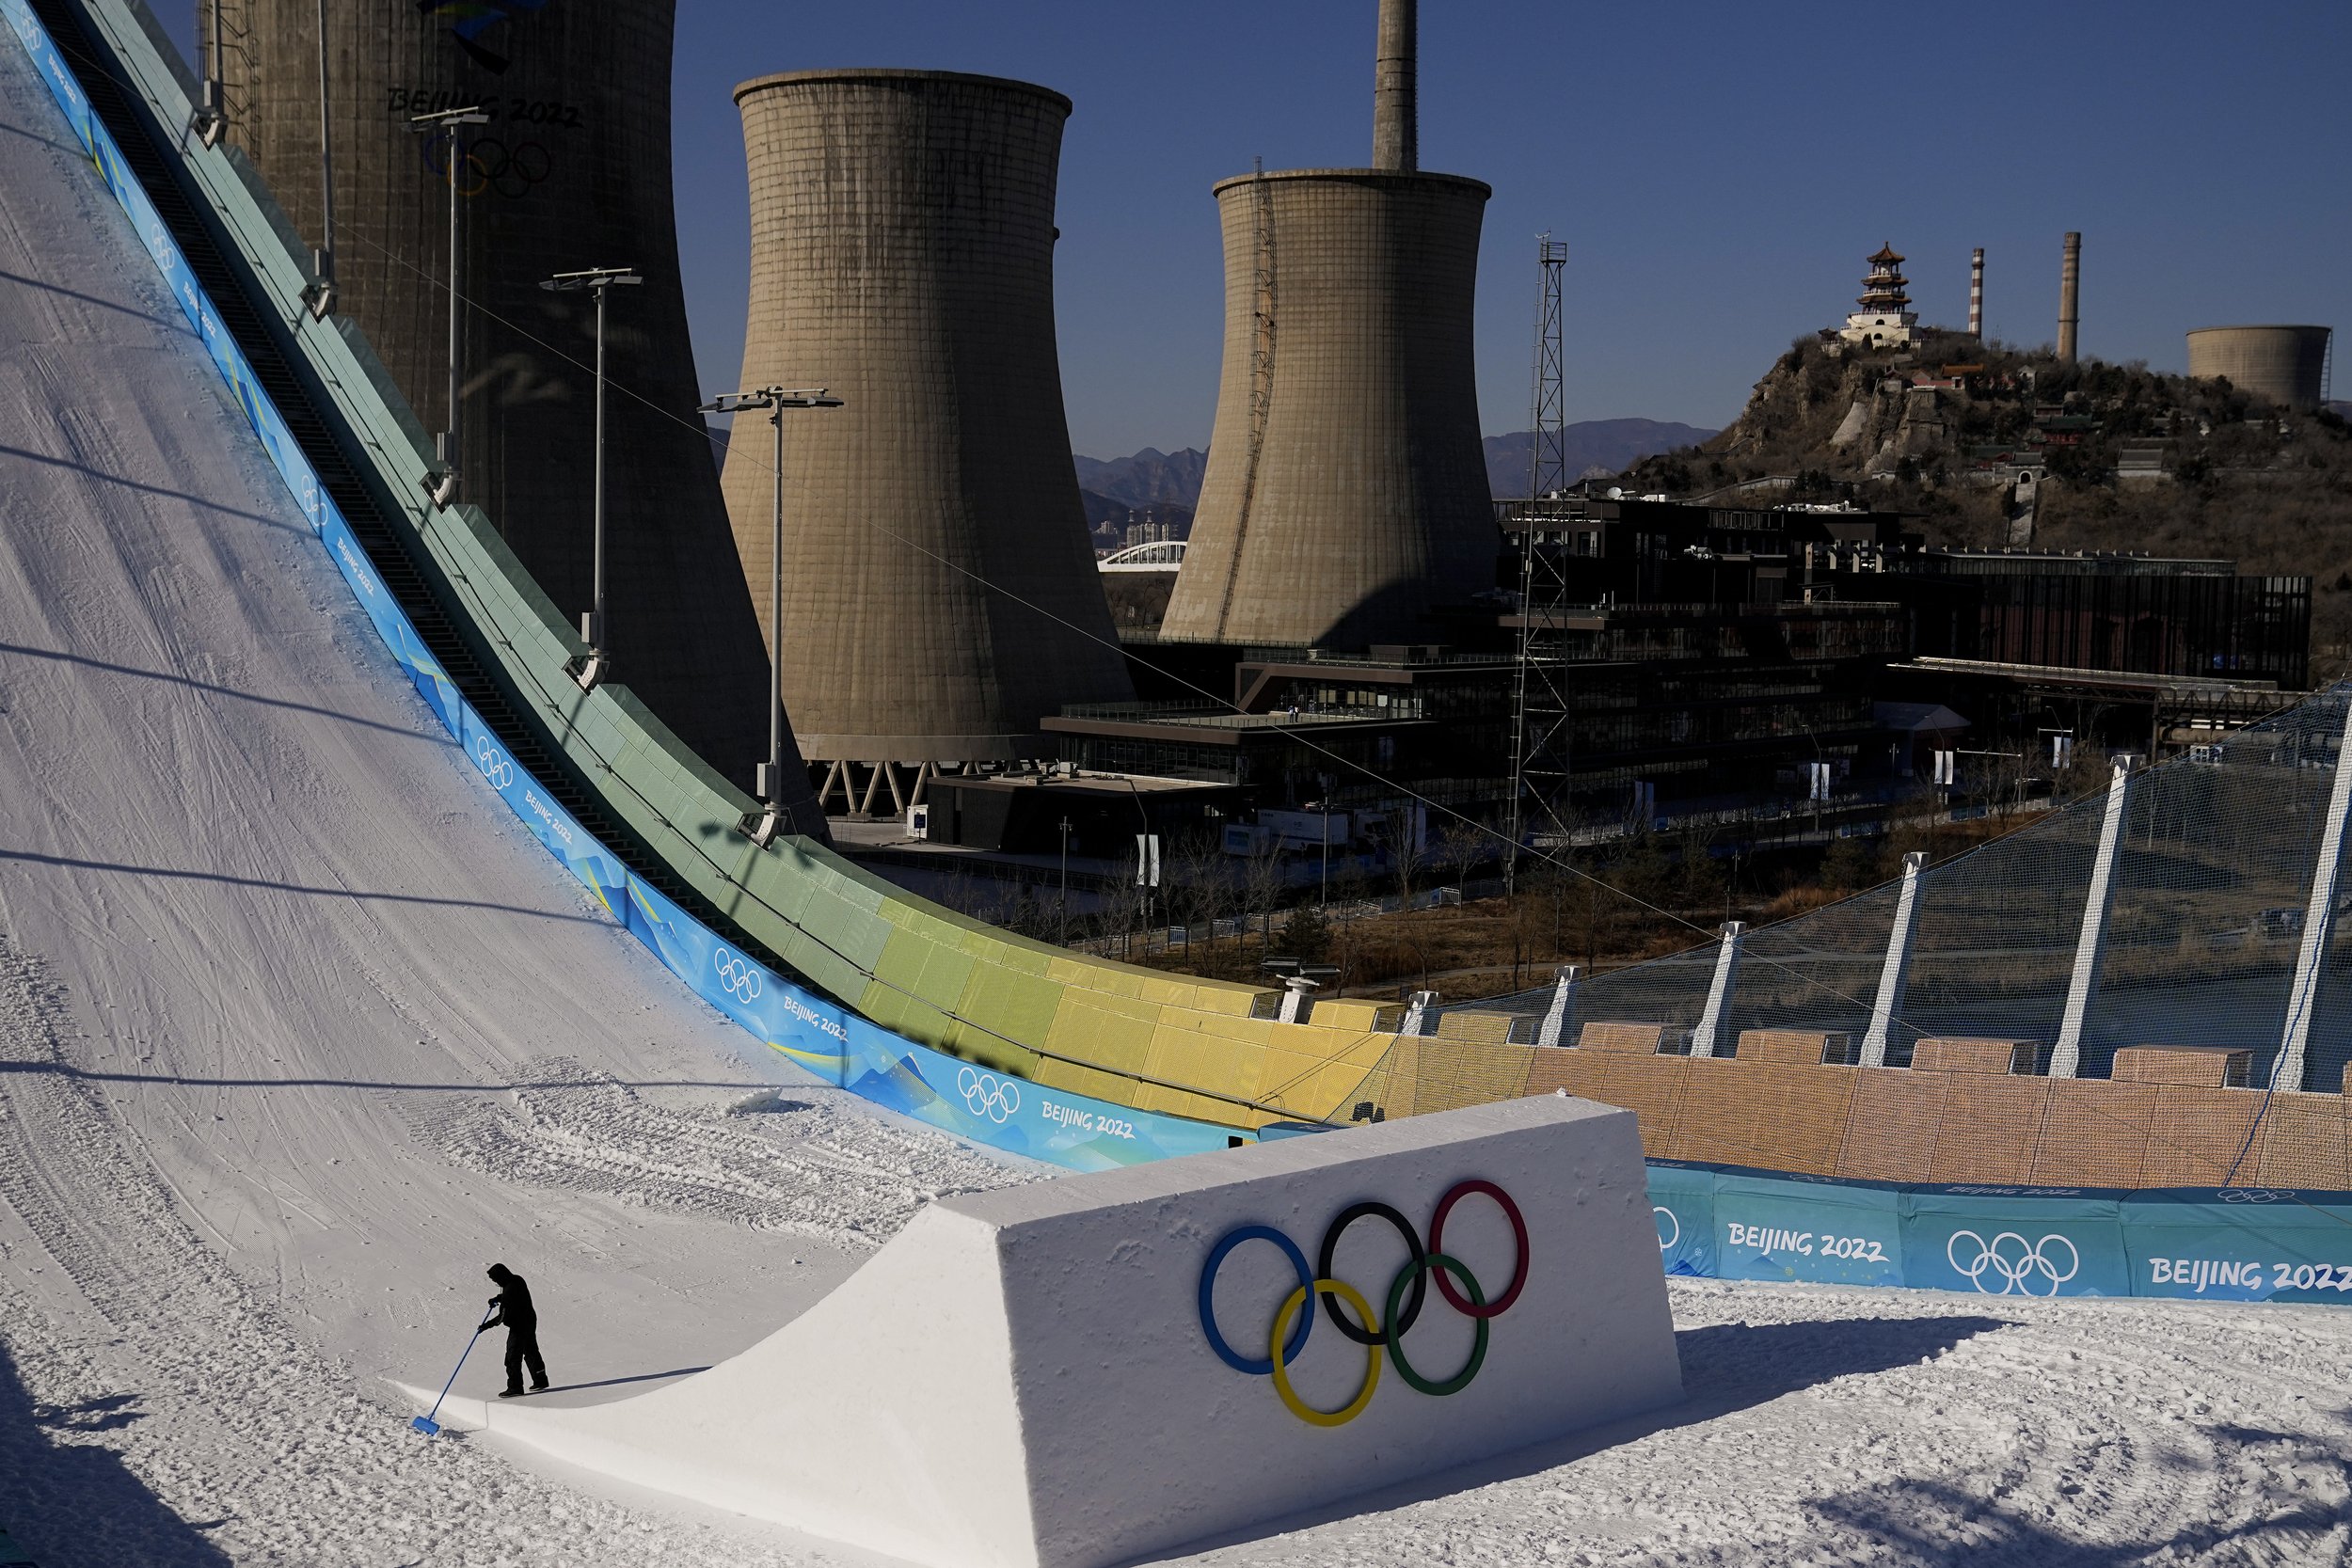  A worker shapes the kicker at the Big Air Shougang ahead of the 2022 Winter Olympics, Feb. 1, 2022, in Beijing, as the old cooling towers of a steel plant stand in the city's former industrial district. (AP Photo/Jae C. Hong) 